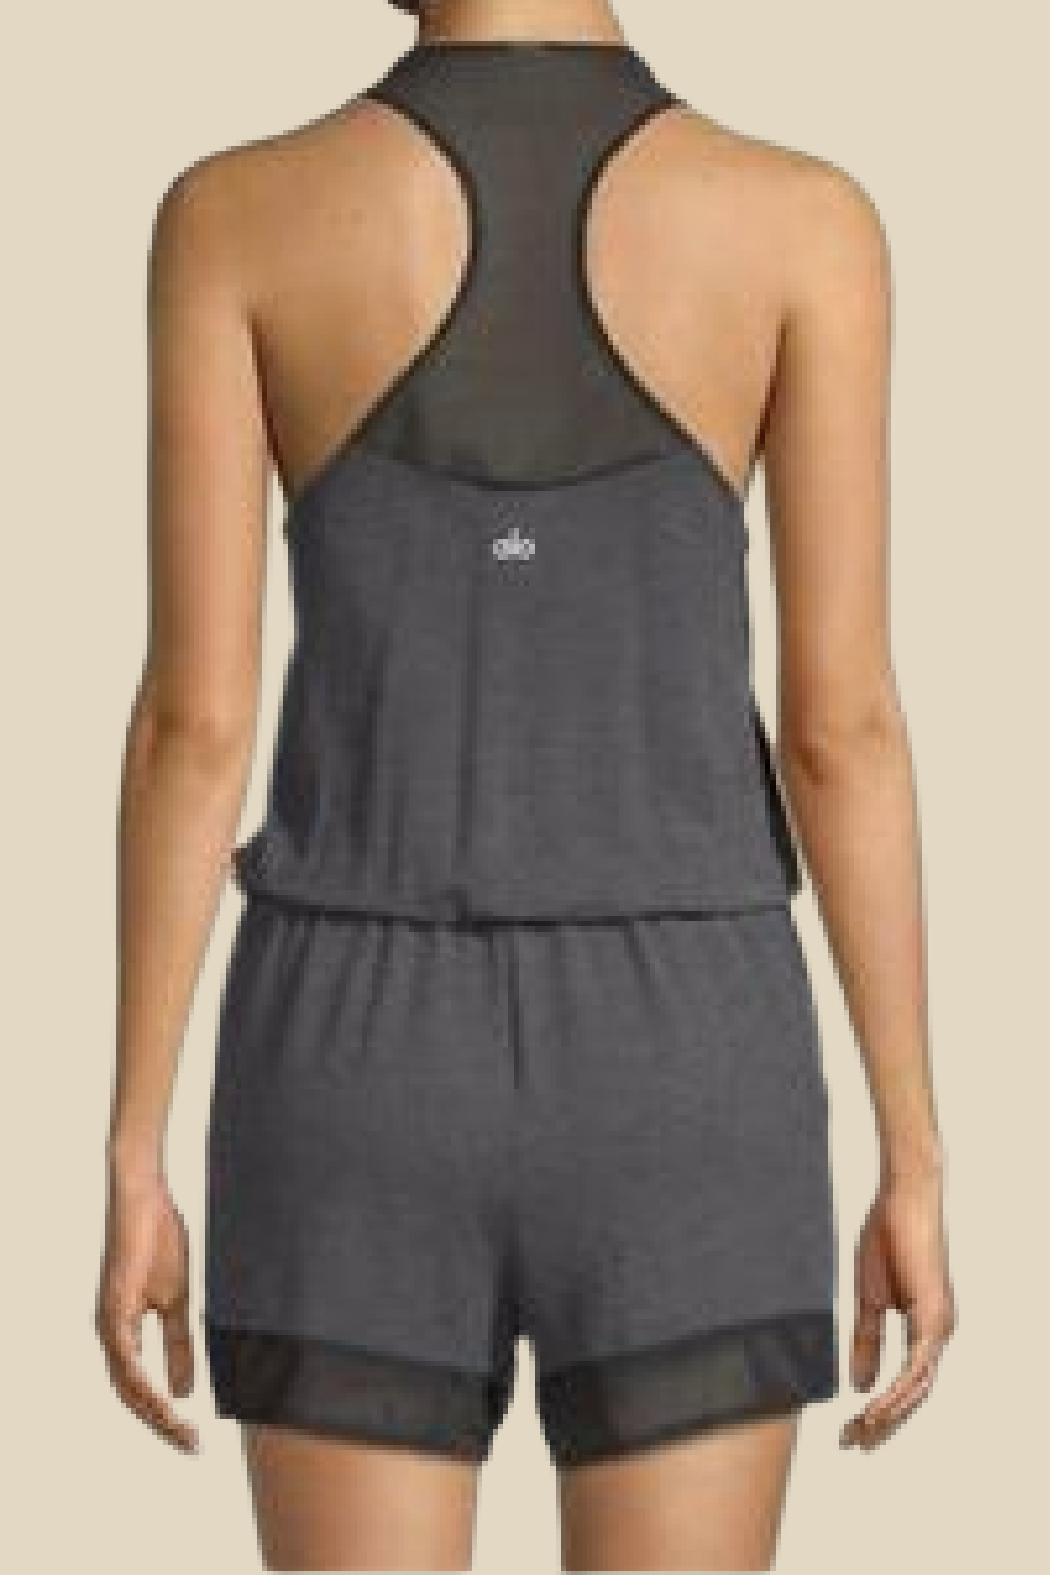 Tranquility Romper